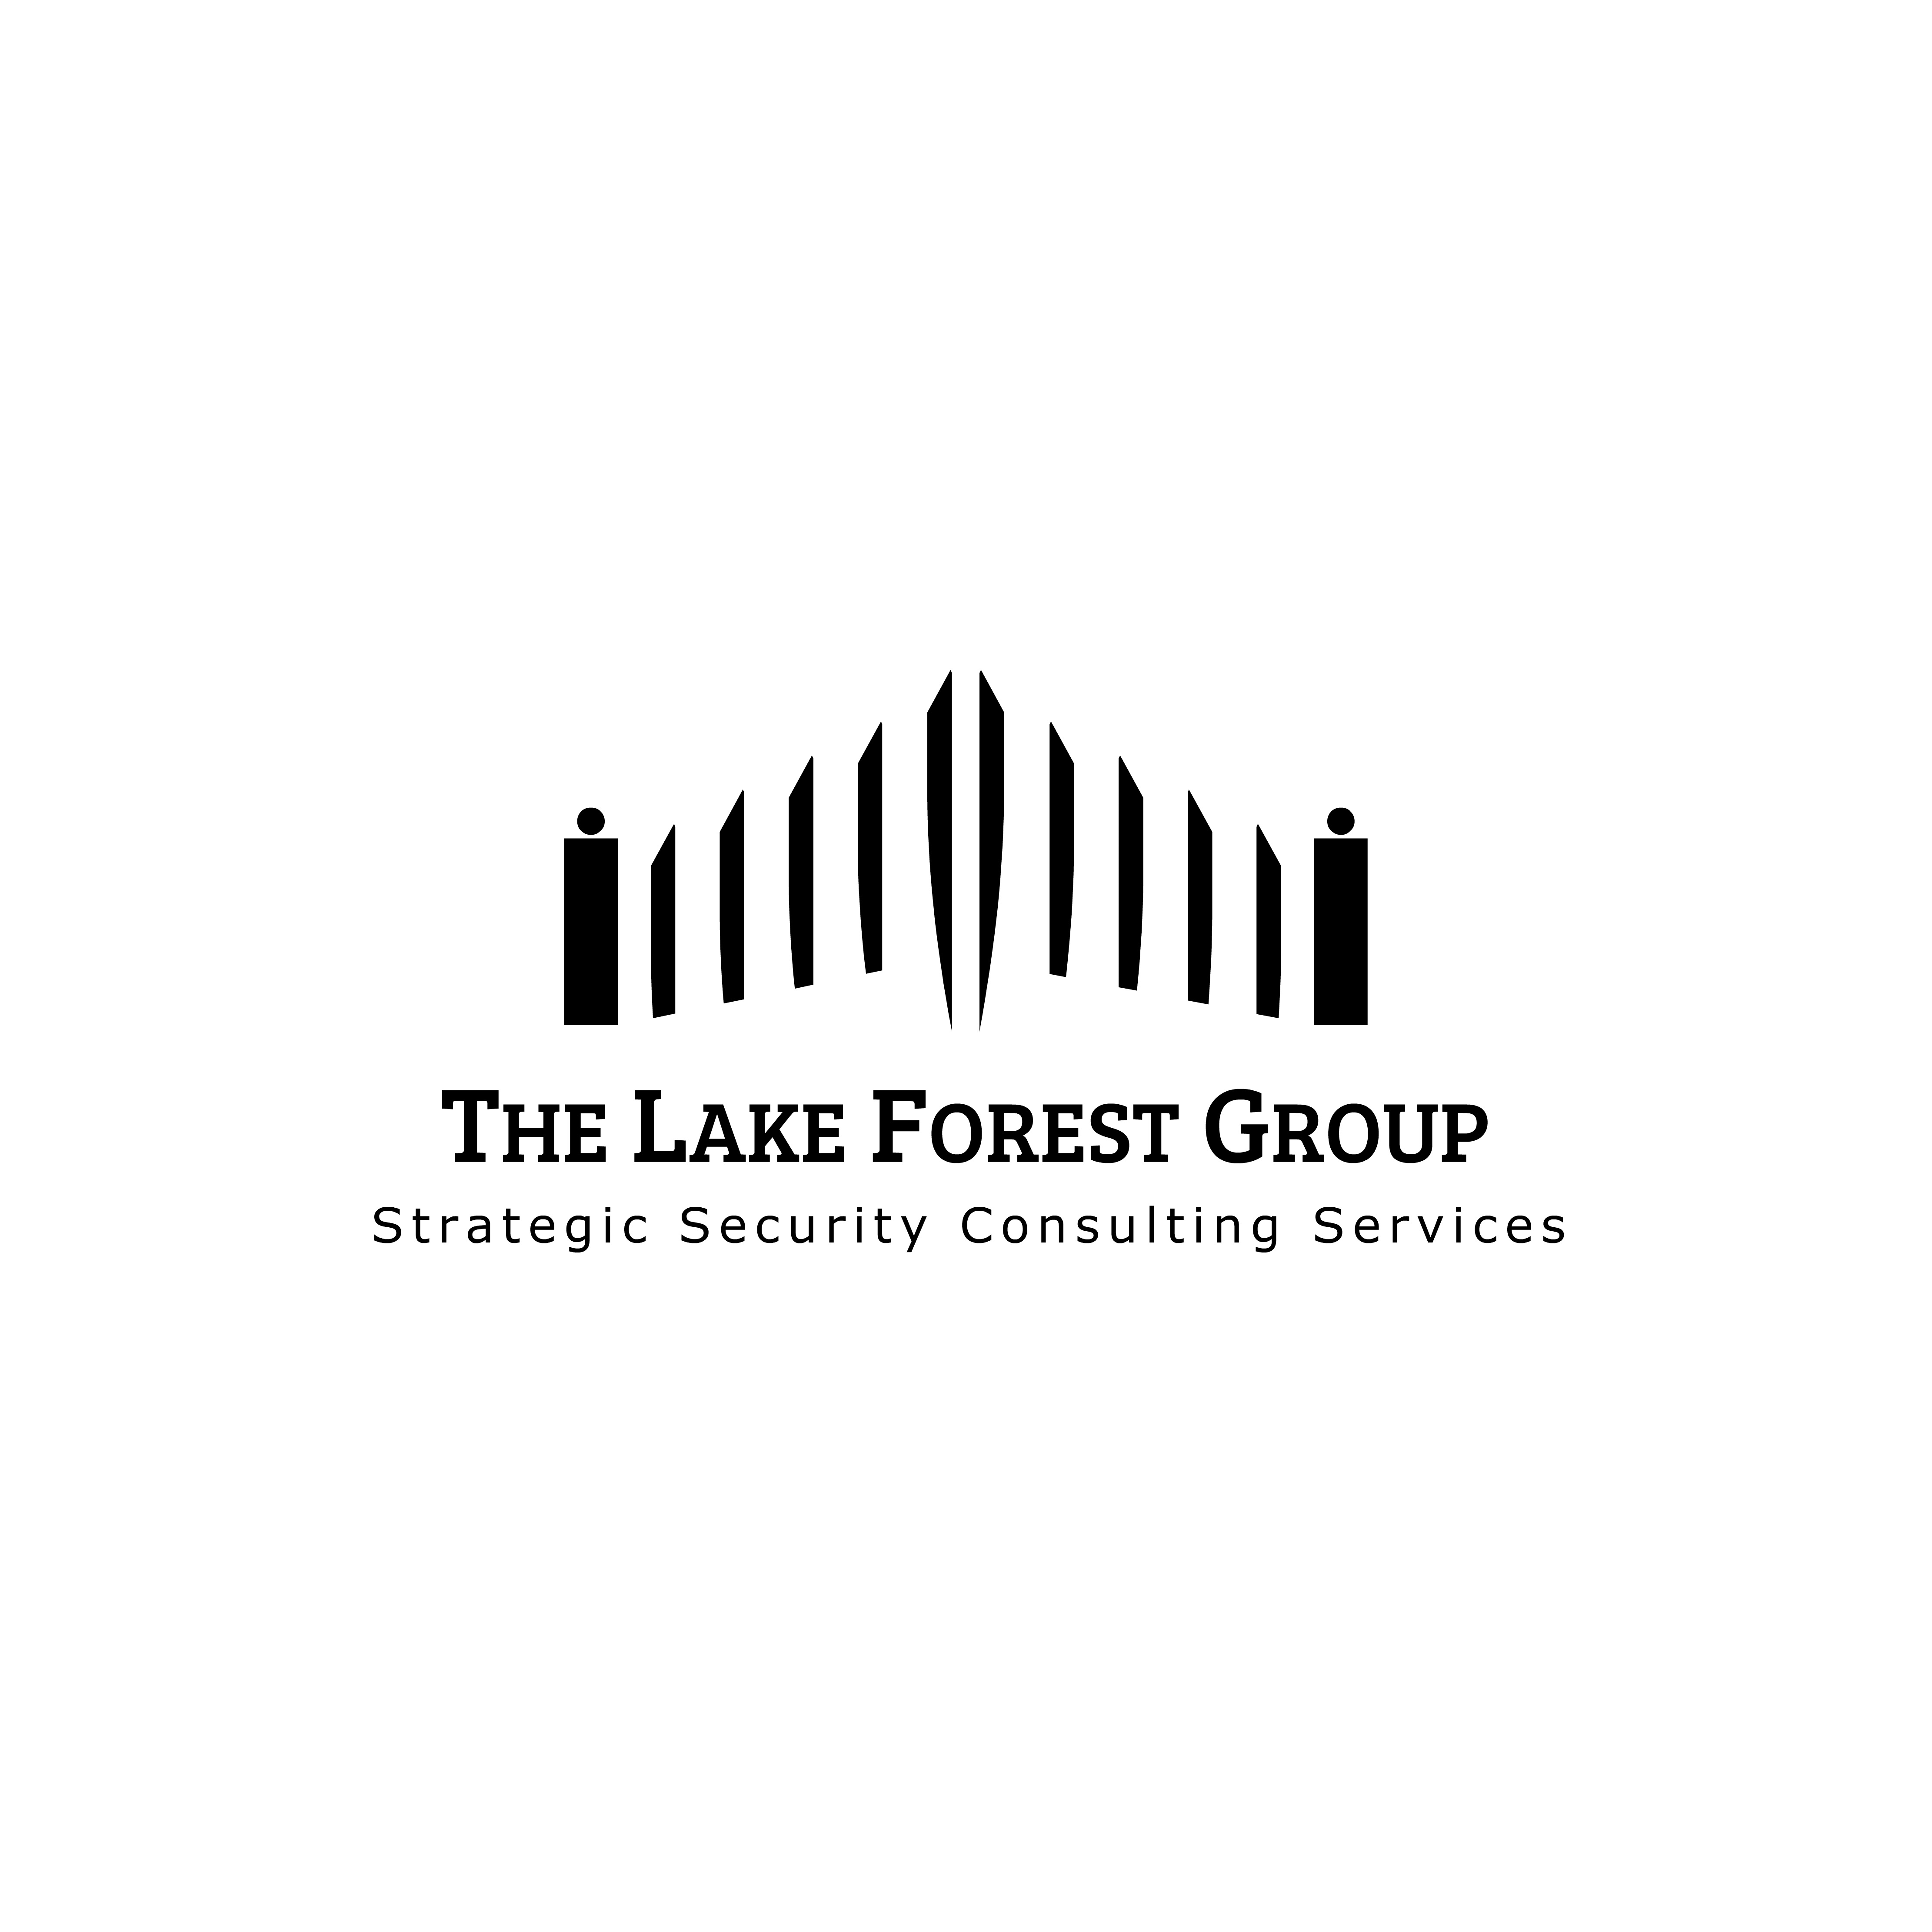 The Lake Forest Group